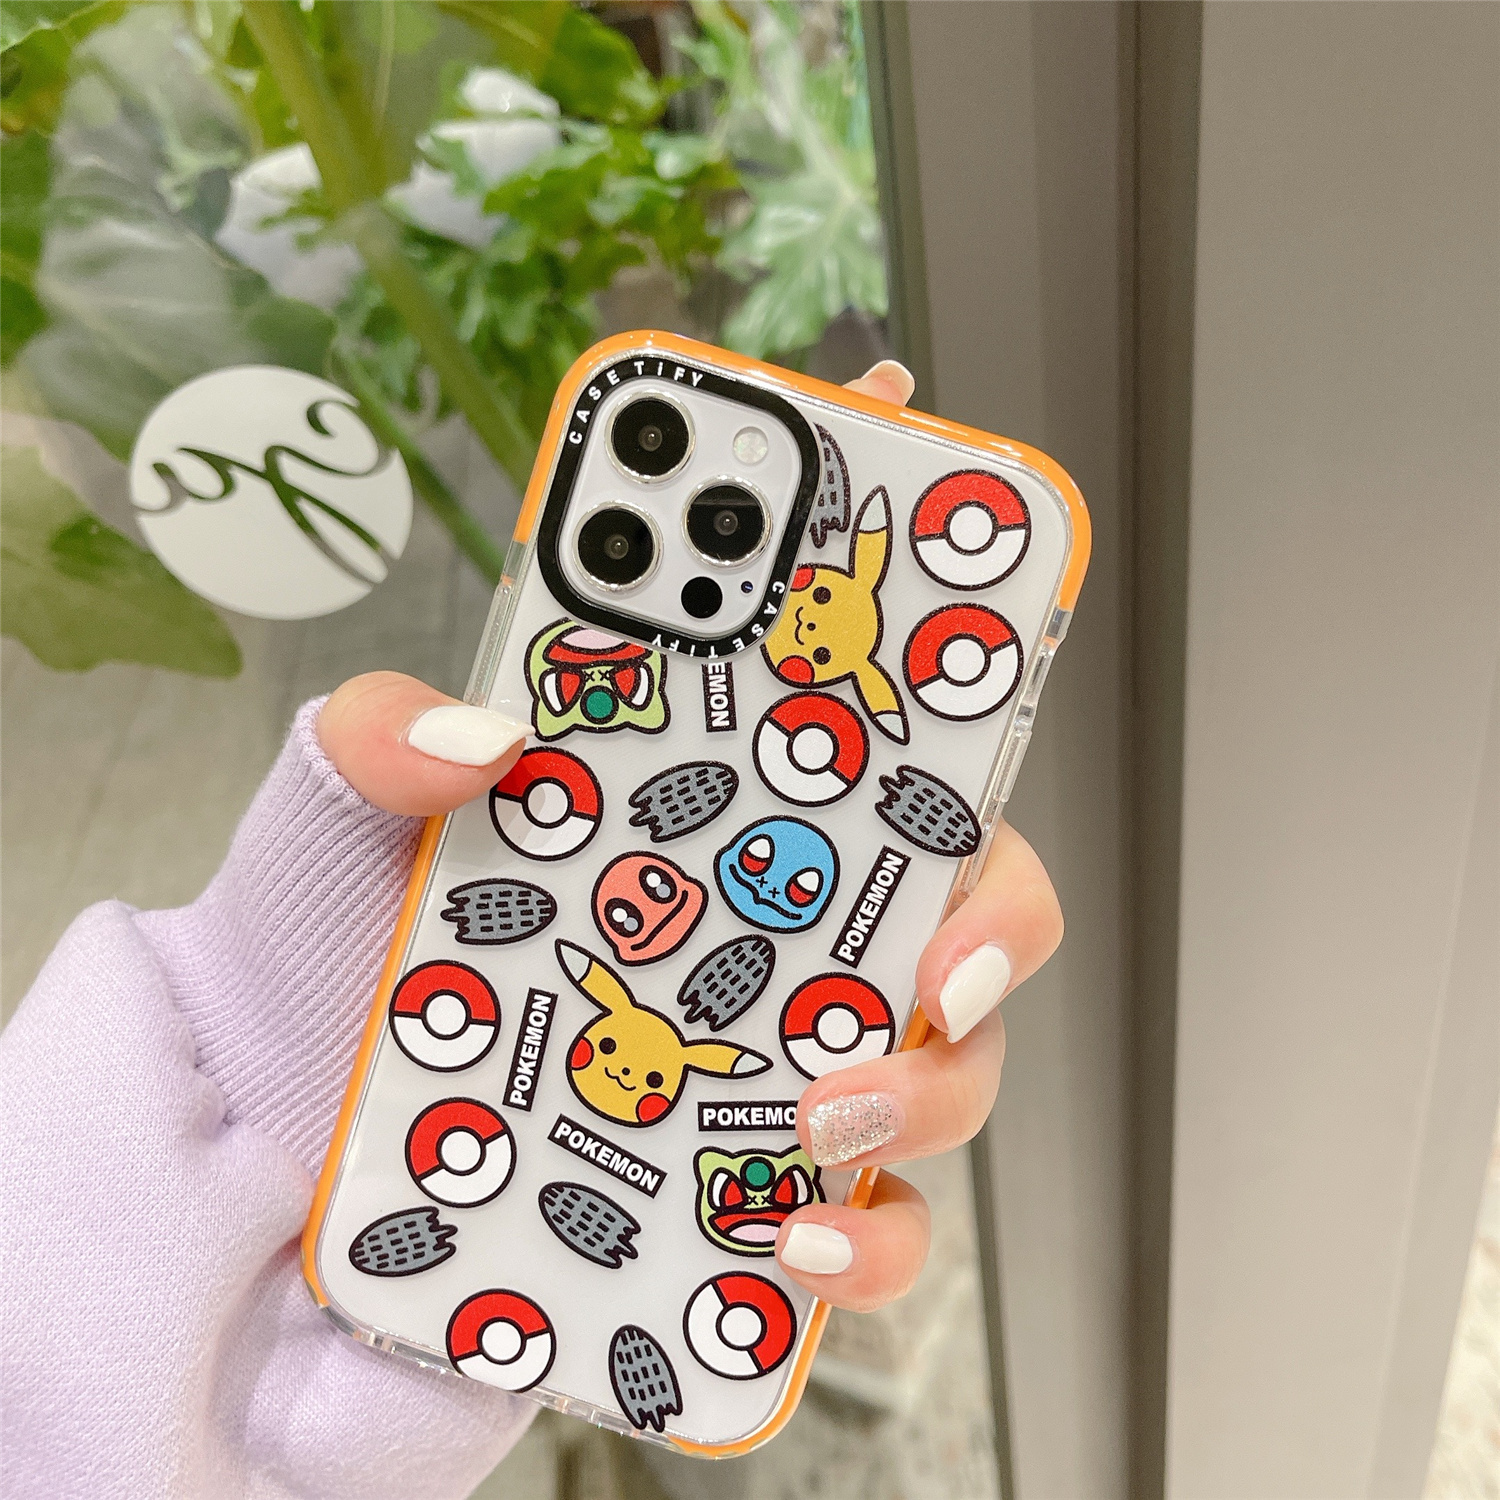 Casetify Phone Case iPhone 11 12 Pro Max 7 8 Plus SE 2020 X XS MAX XR High Quality TPU Soft Silicone Transparent Back Cover iPhone 12 Mini Cartoons Mickey Pokémon Pattern Casing